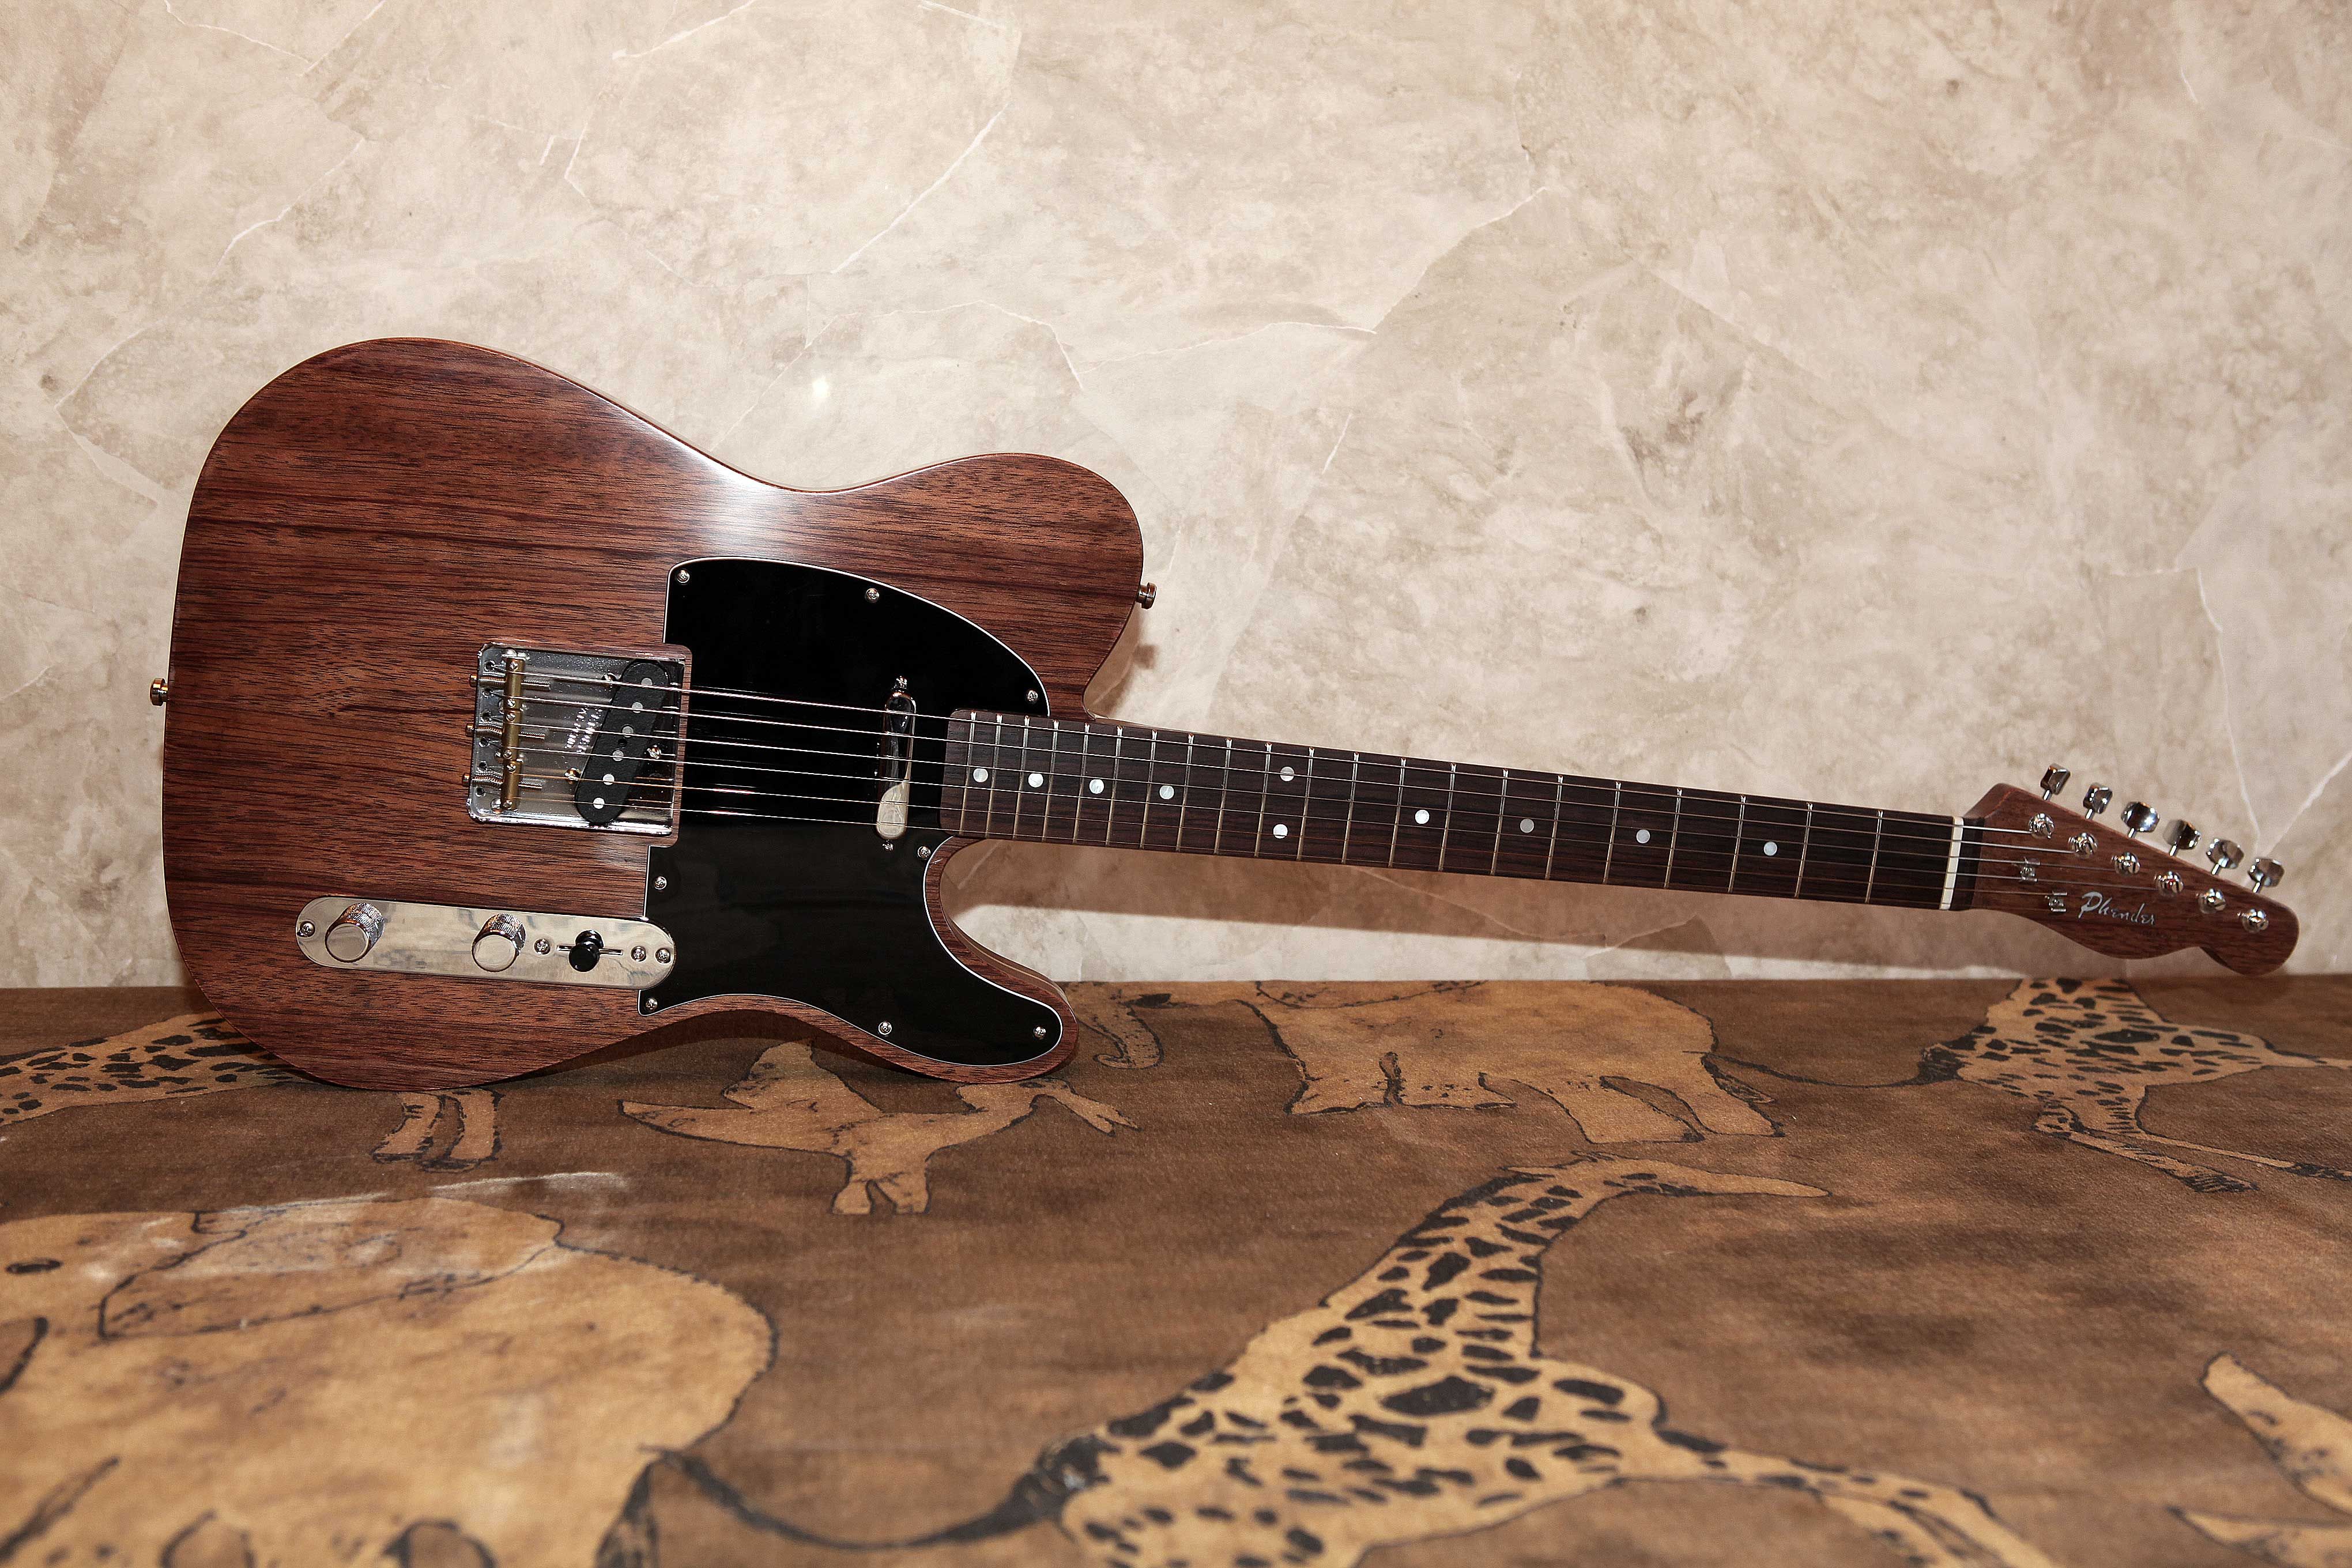 Hand Made Chambered, Rosewood/Maple Tele Style Guitar by Z-Max Guitars